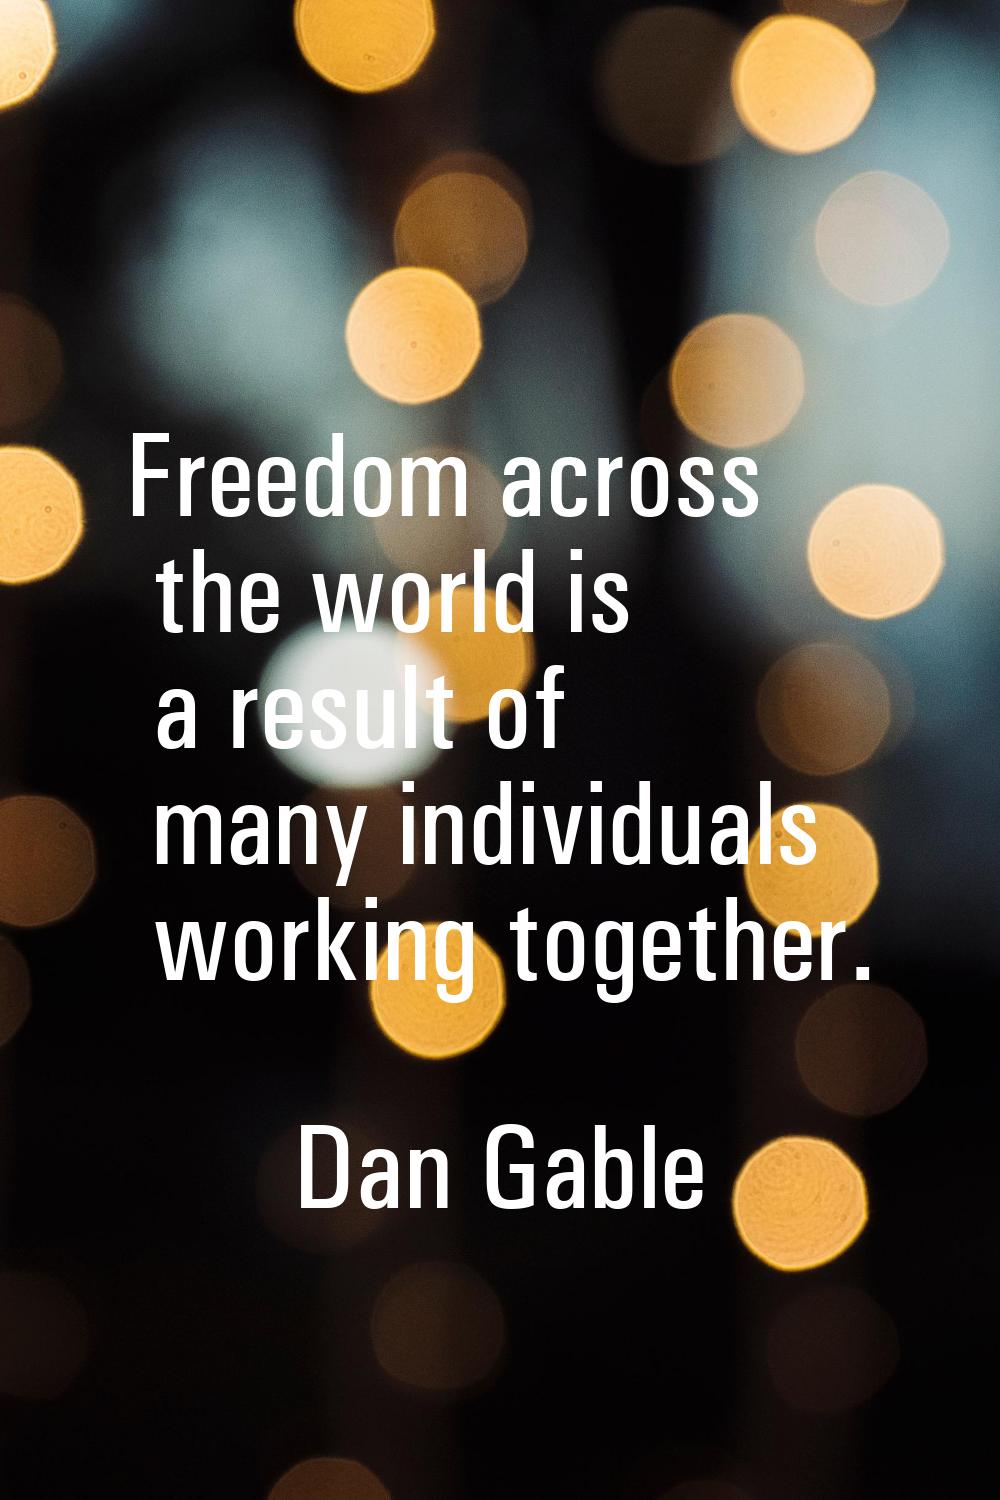 Freedom across the world is a result of many individuals working together.